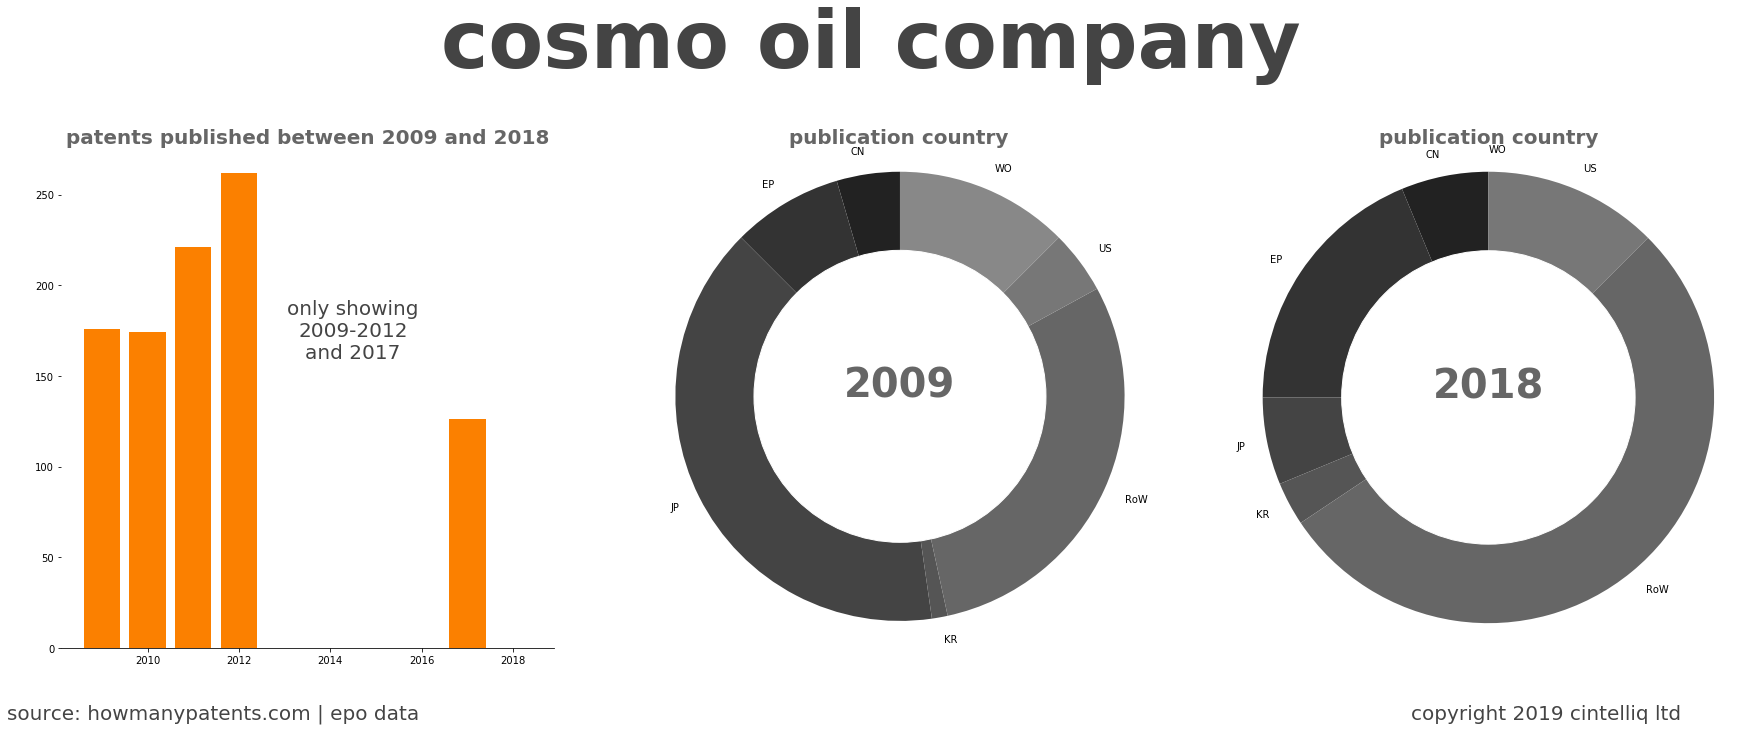 summary of patents for Cosmo Oil Company